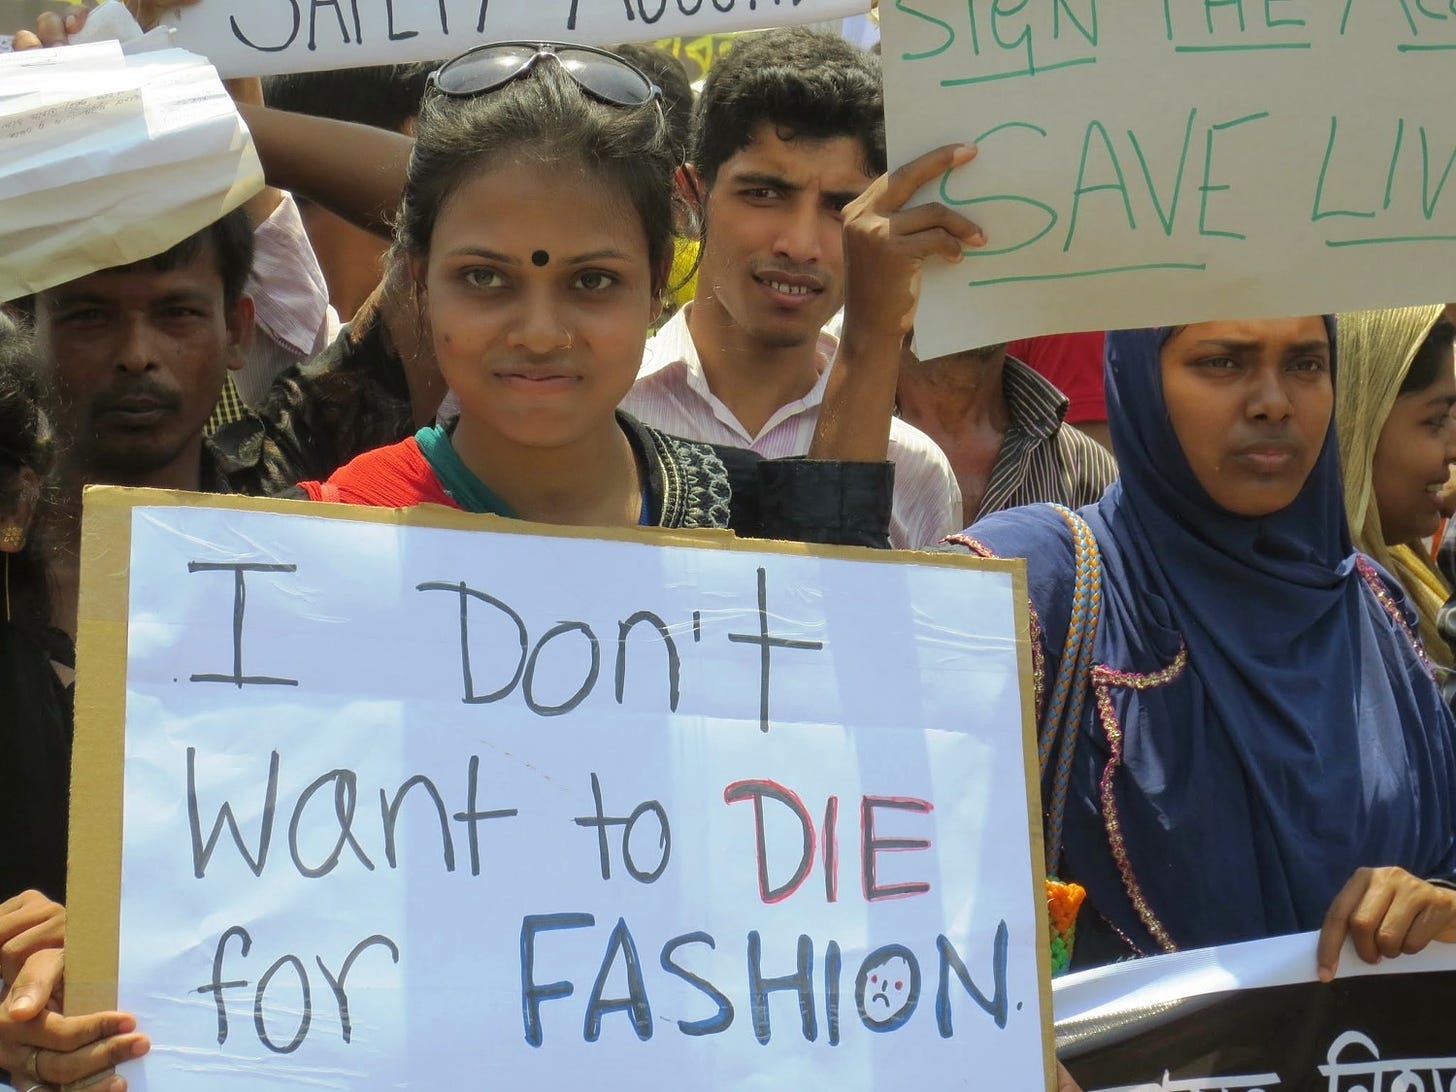 Bangladeshi garment worker holding a sign at a protest: "I don't want to die for fashion".